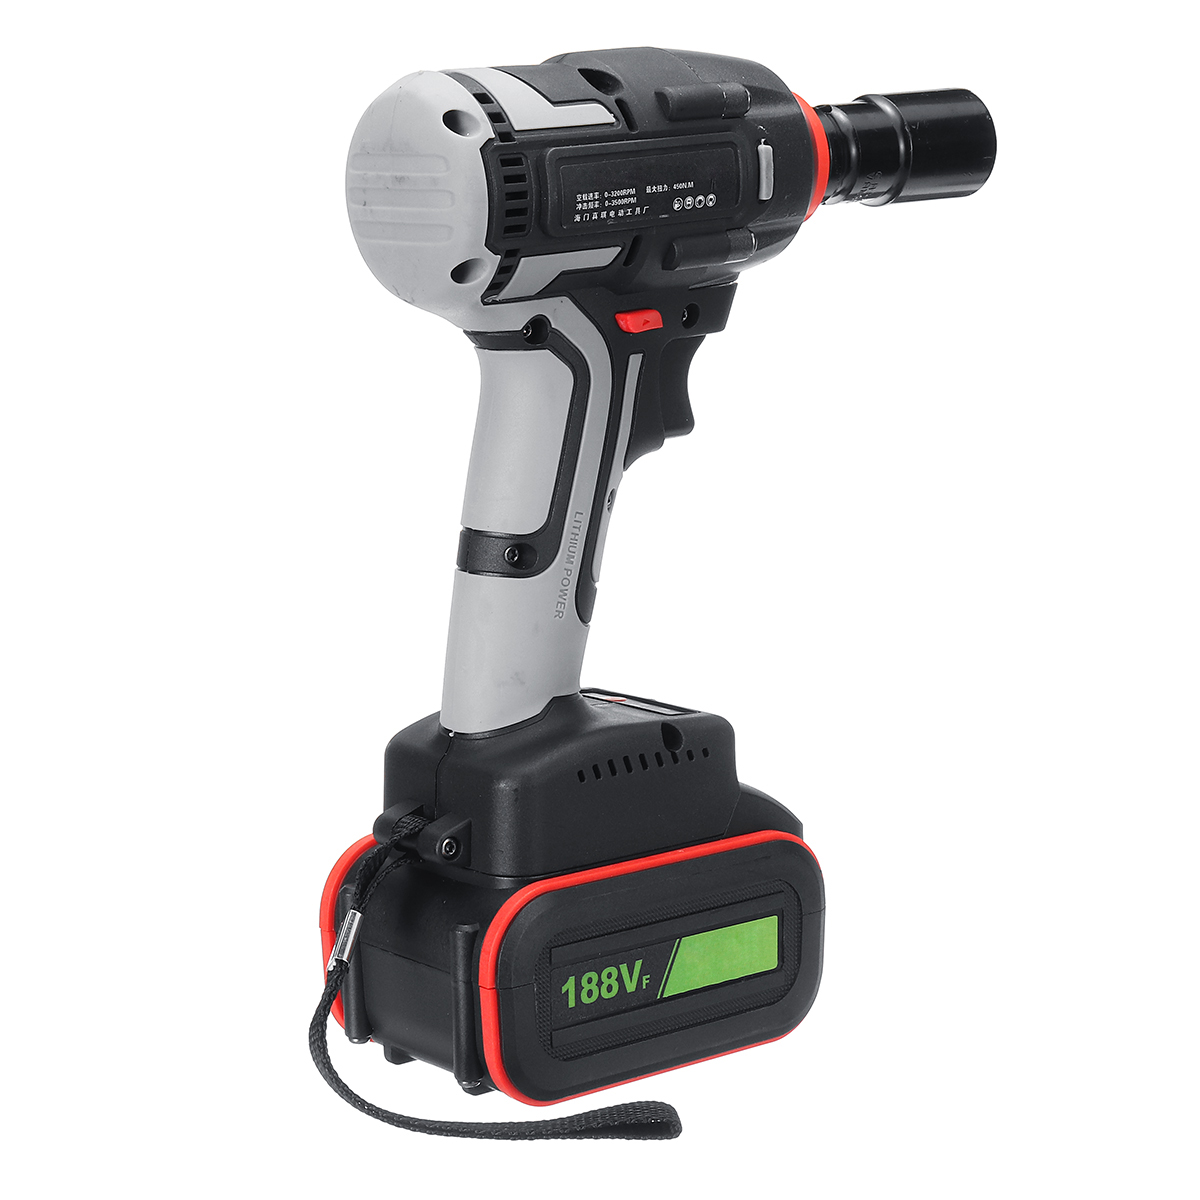 100-240V-Torque-450NM-Electric-Impact-Wrench-Cordless-Motor-Brushless-Rattle-Driver-1444636-9